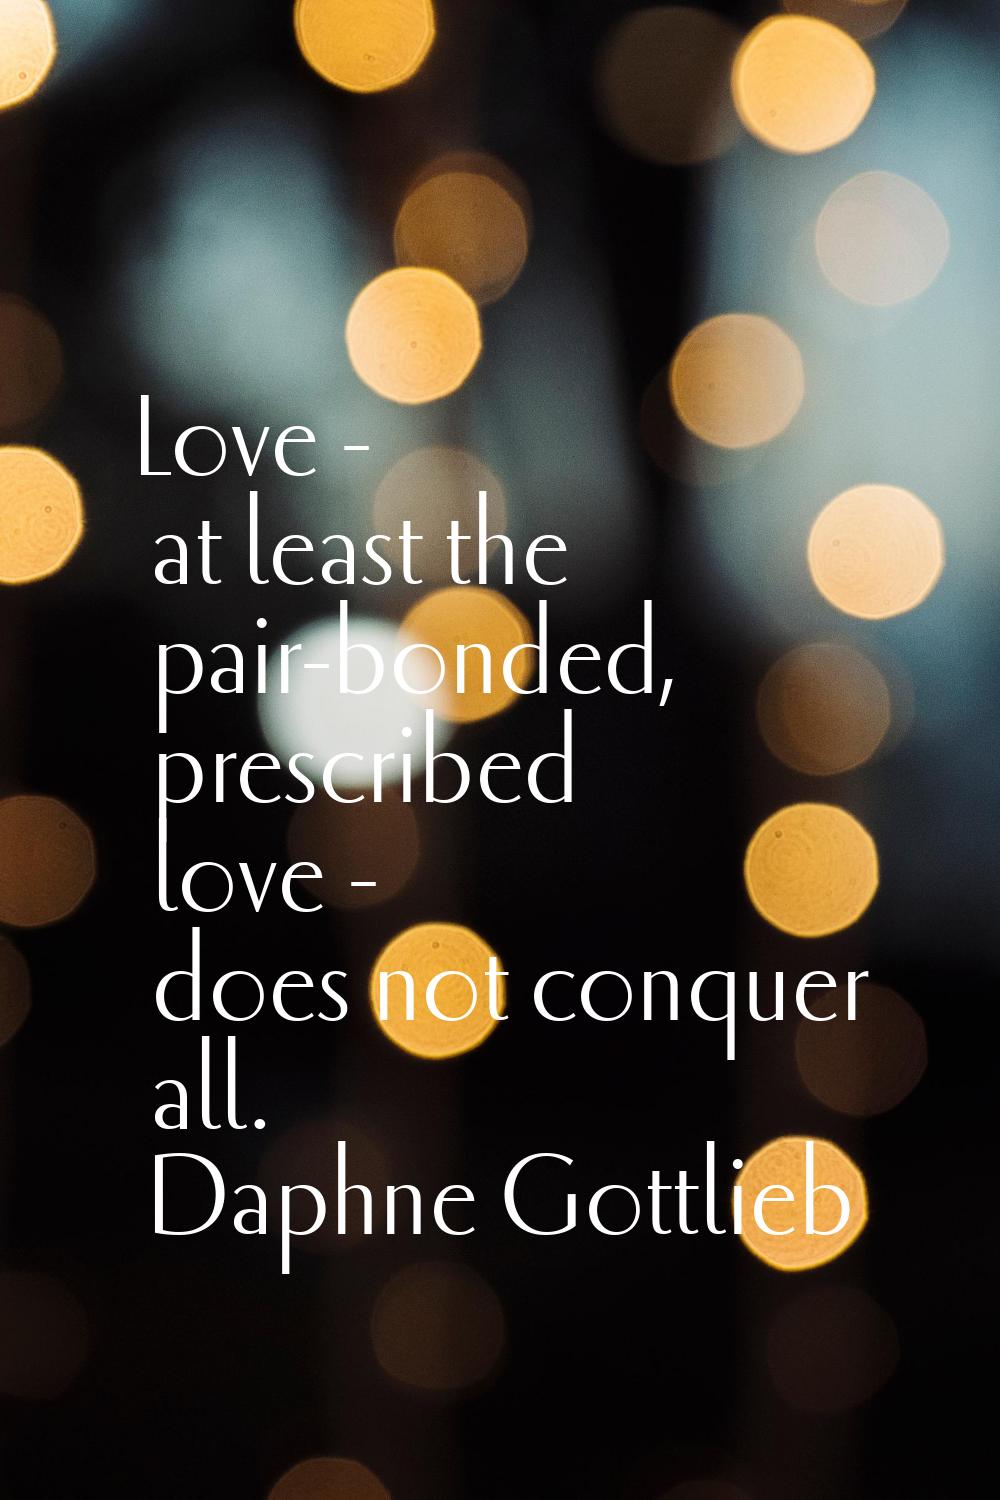 Love - at least the pair-bonded, prescribed love - does not conquer all.